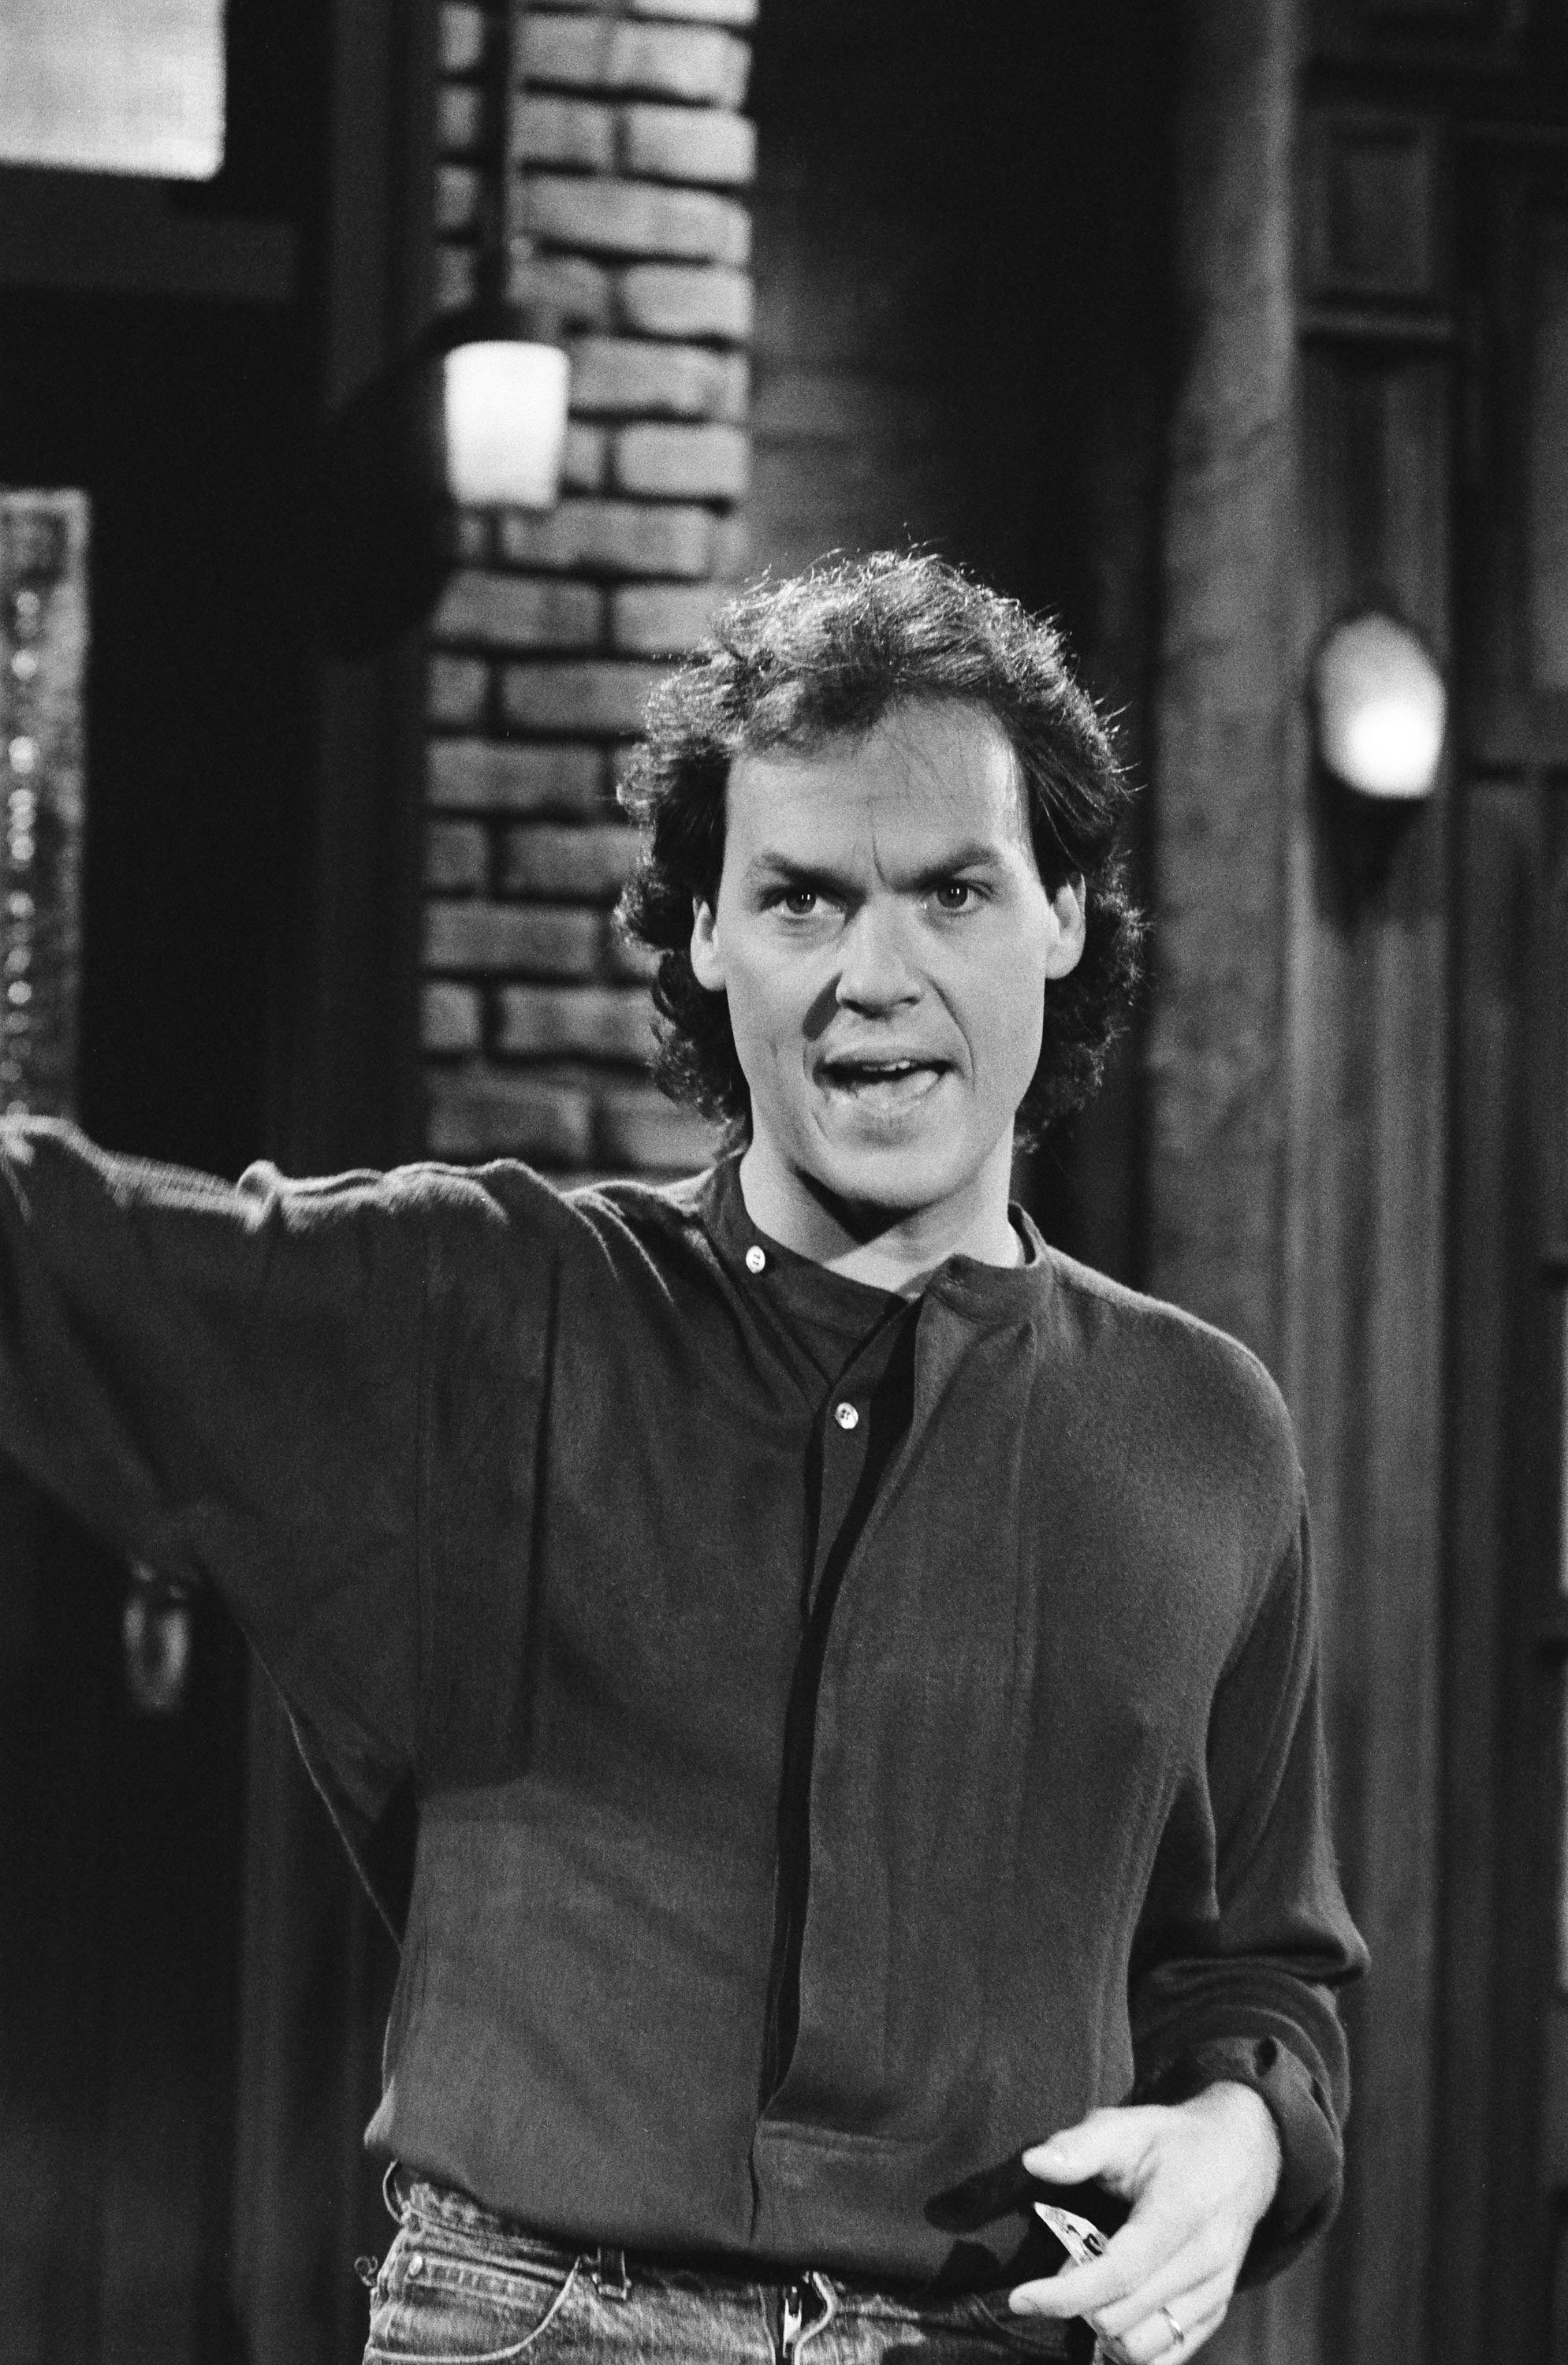 Michael Keaton photographed during his monologue on Saturday Night Live, on October 30, 1982 | Source: Getty Images